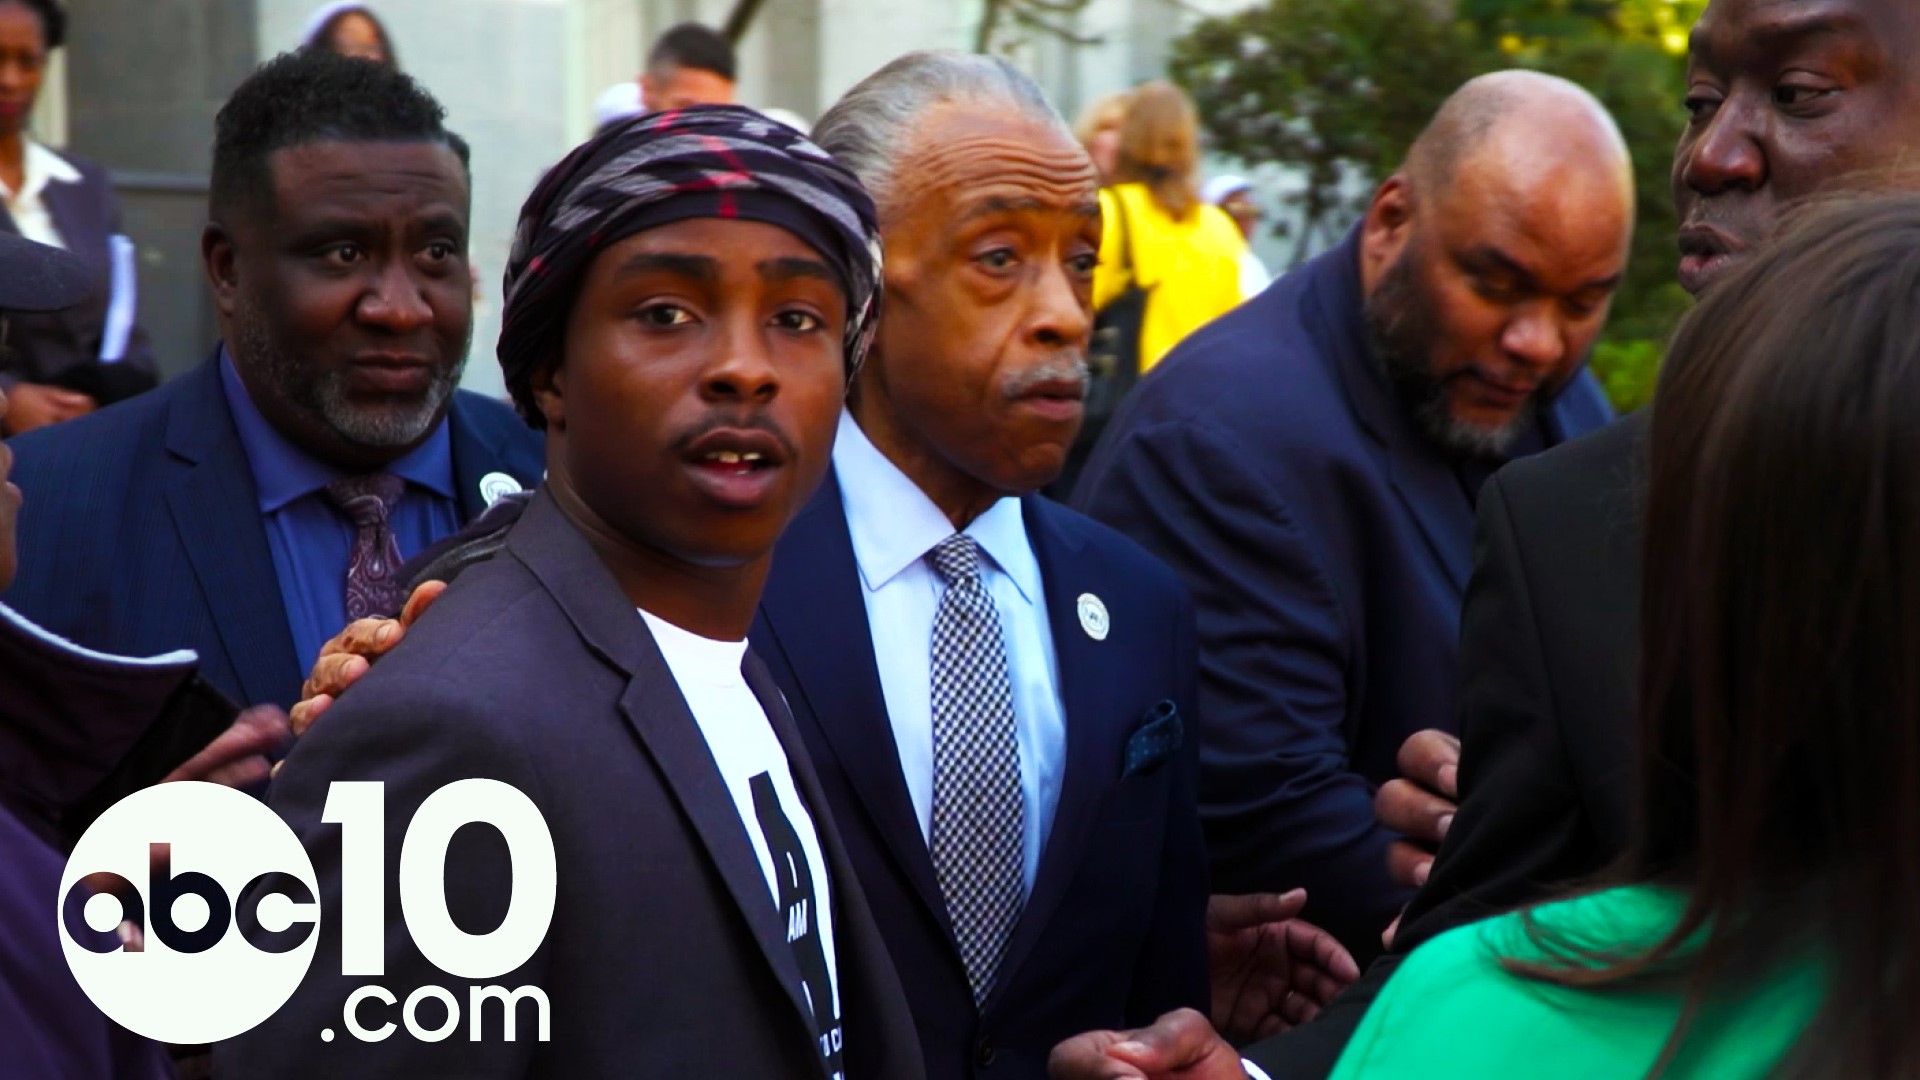 One year from the fatal shooting of Stephon Clark, Clark's family and supporters gathered to press for changes on when police can shoot at suspects and how those cases are handled afterwards.